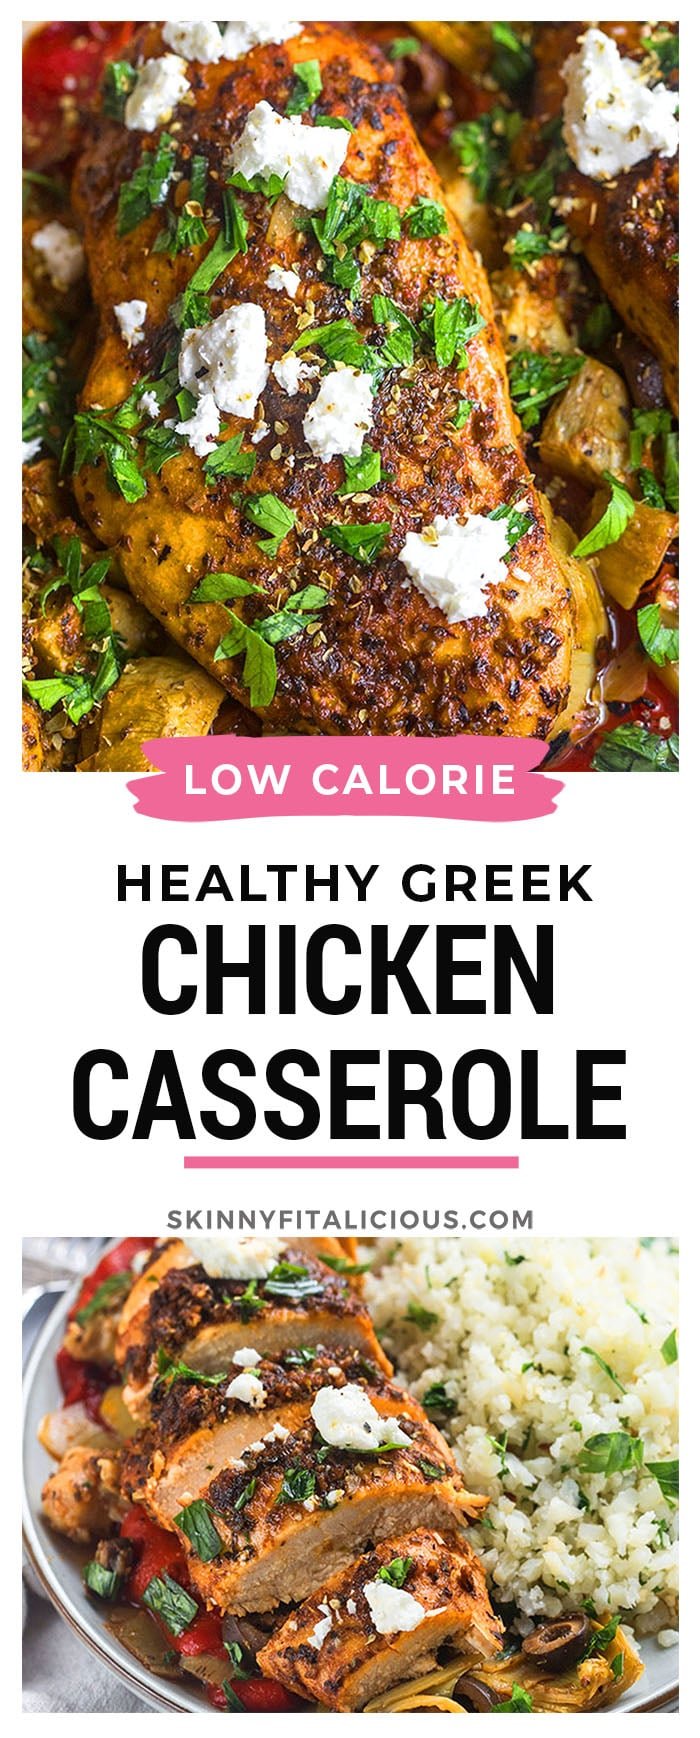 Healthy Greek Chicken Casserole is a low calorie, Mediterranean meal paired with vegetables and cauliflower rice